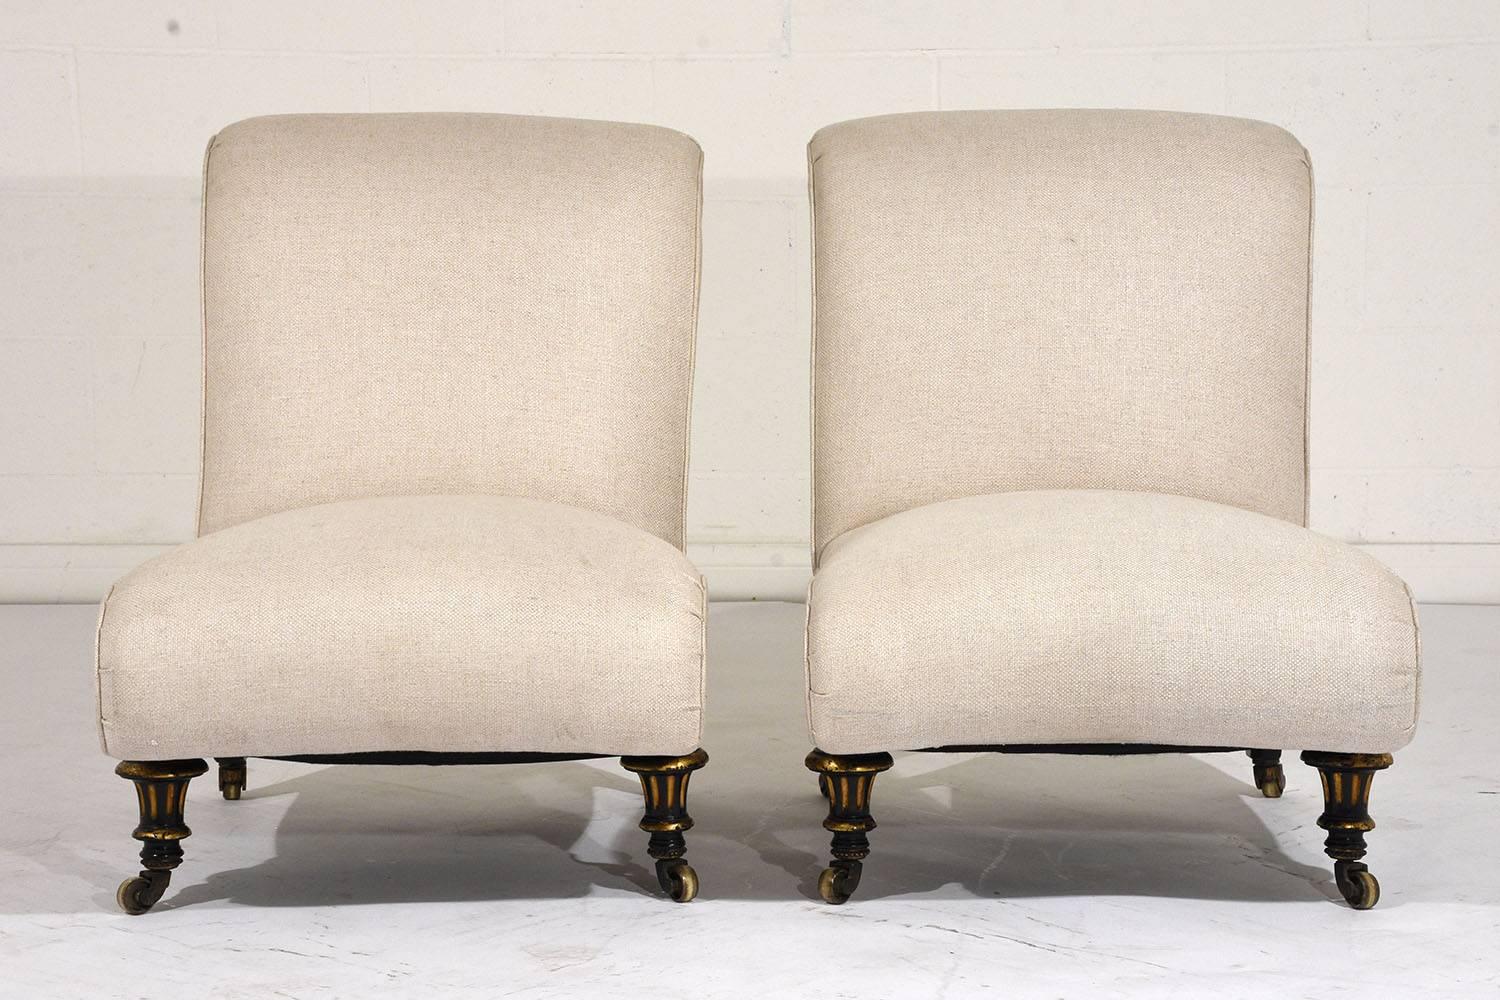 This pair of 1900s antique French Regency-style slipper chairs feature wood frames that feature an ebonized and lacquered finish. The beautiful curved frame has scroll details on the back and at the front. The delicate moulding details have gild